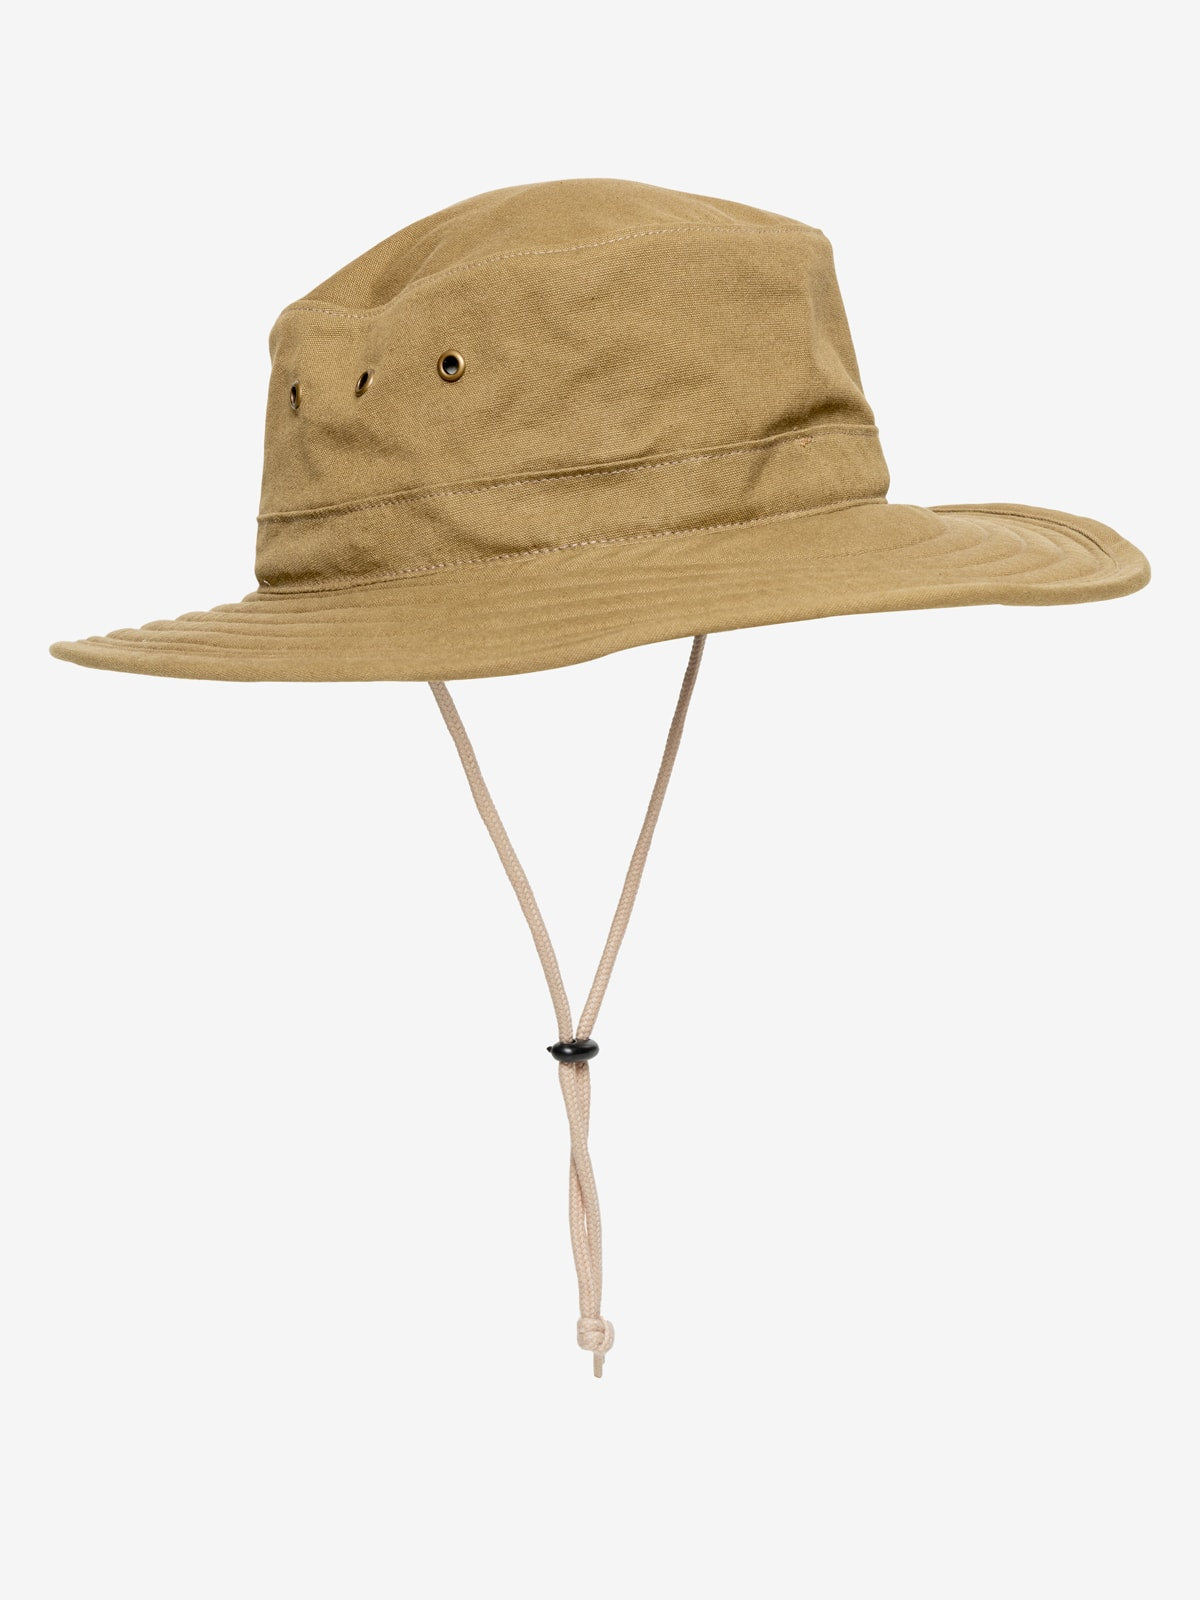 Insect Shield Brim Hat